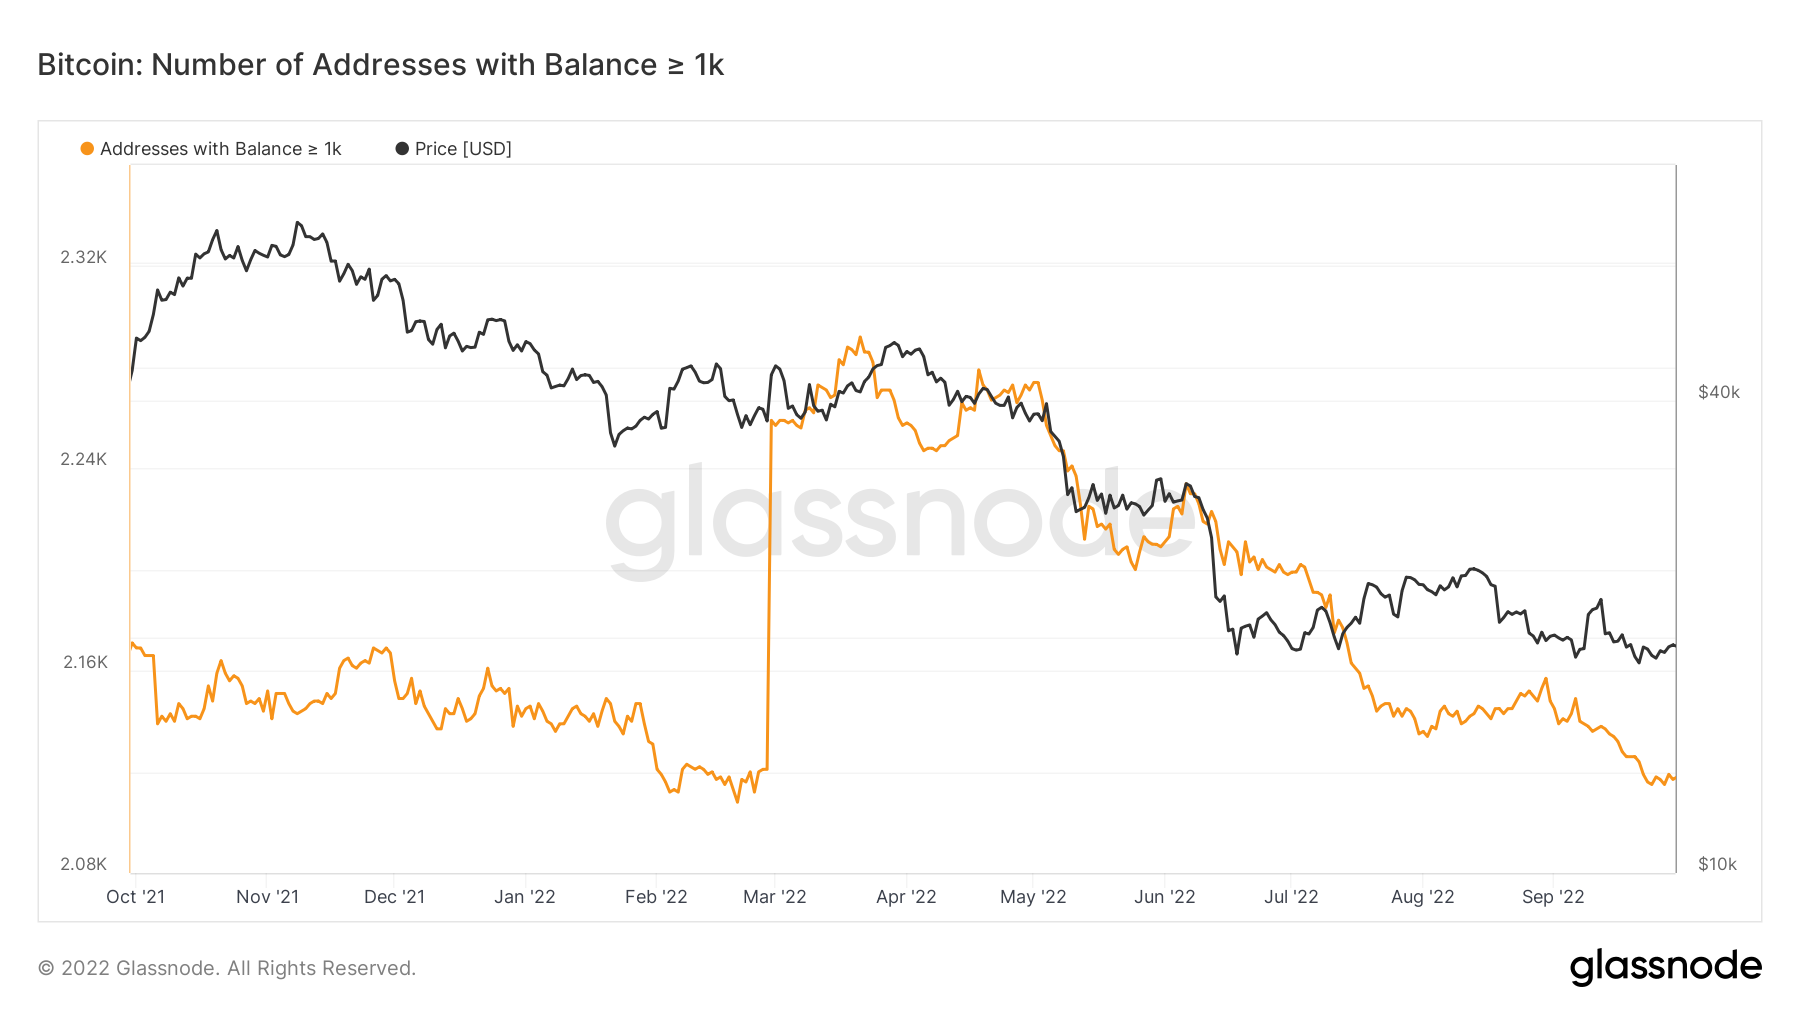 Bitcoin Number of Addresses with Balance ≥ 1k